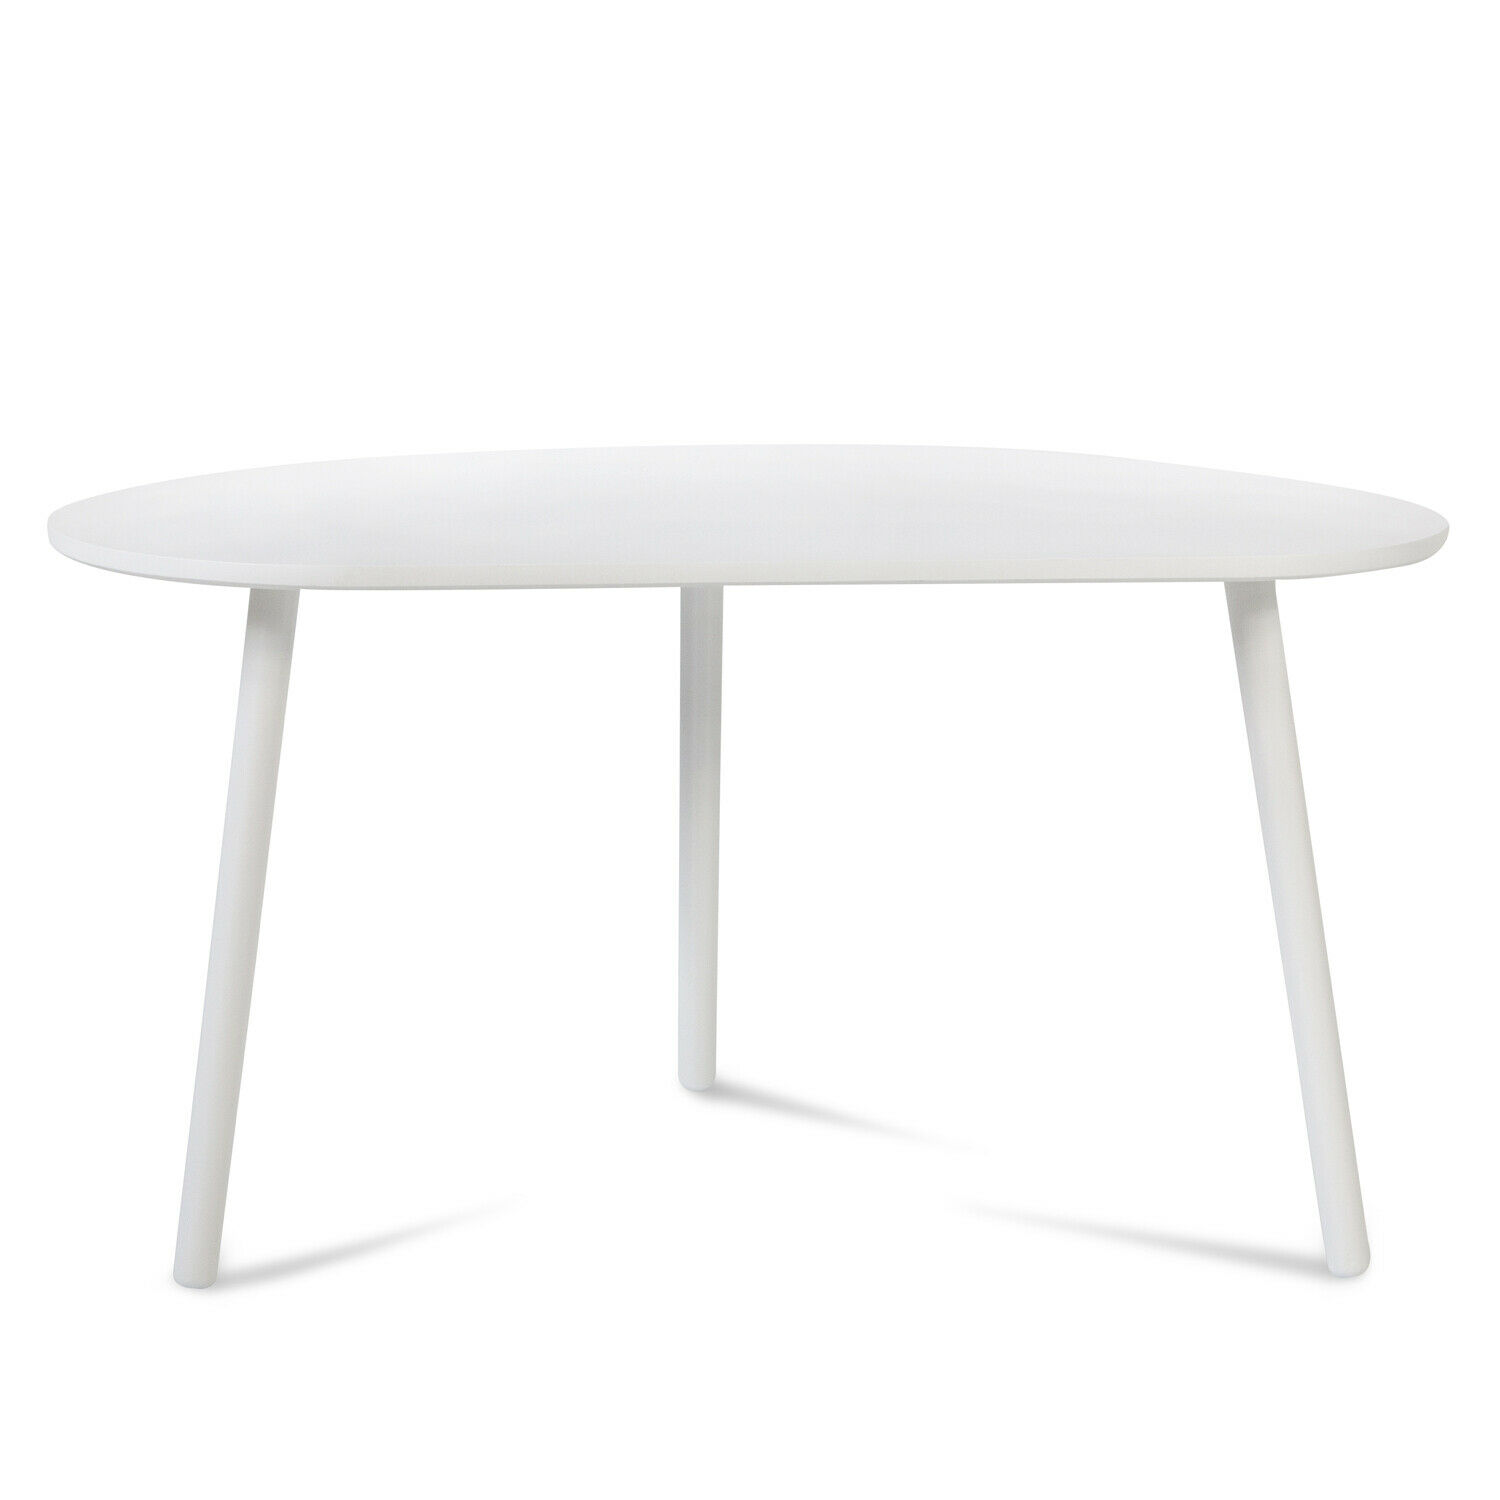 Side Table Occasional Table Coffee Table White Wooden Table Kidney Table Wood